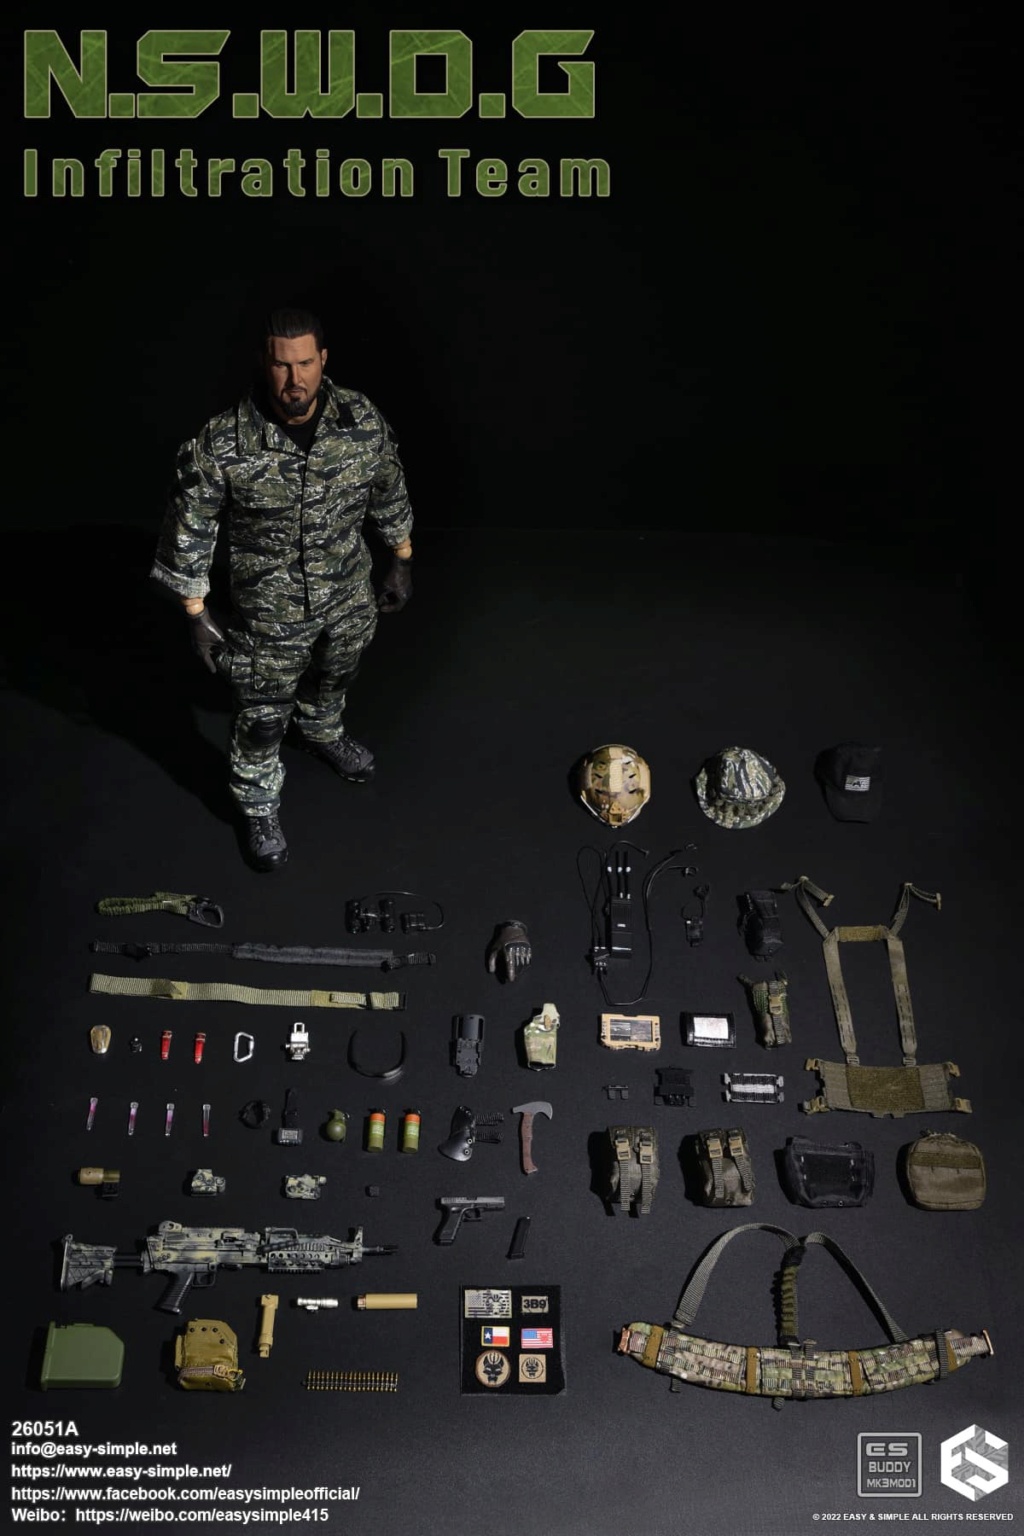 easy - NEW PRODUCT: EASY AND SIMPLE 1/6 SCALE FIGURE: N.S.W.D.G INFILTRATION TEAM - (2 Versions) 44115